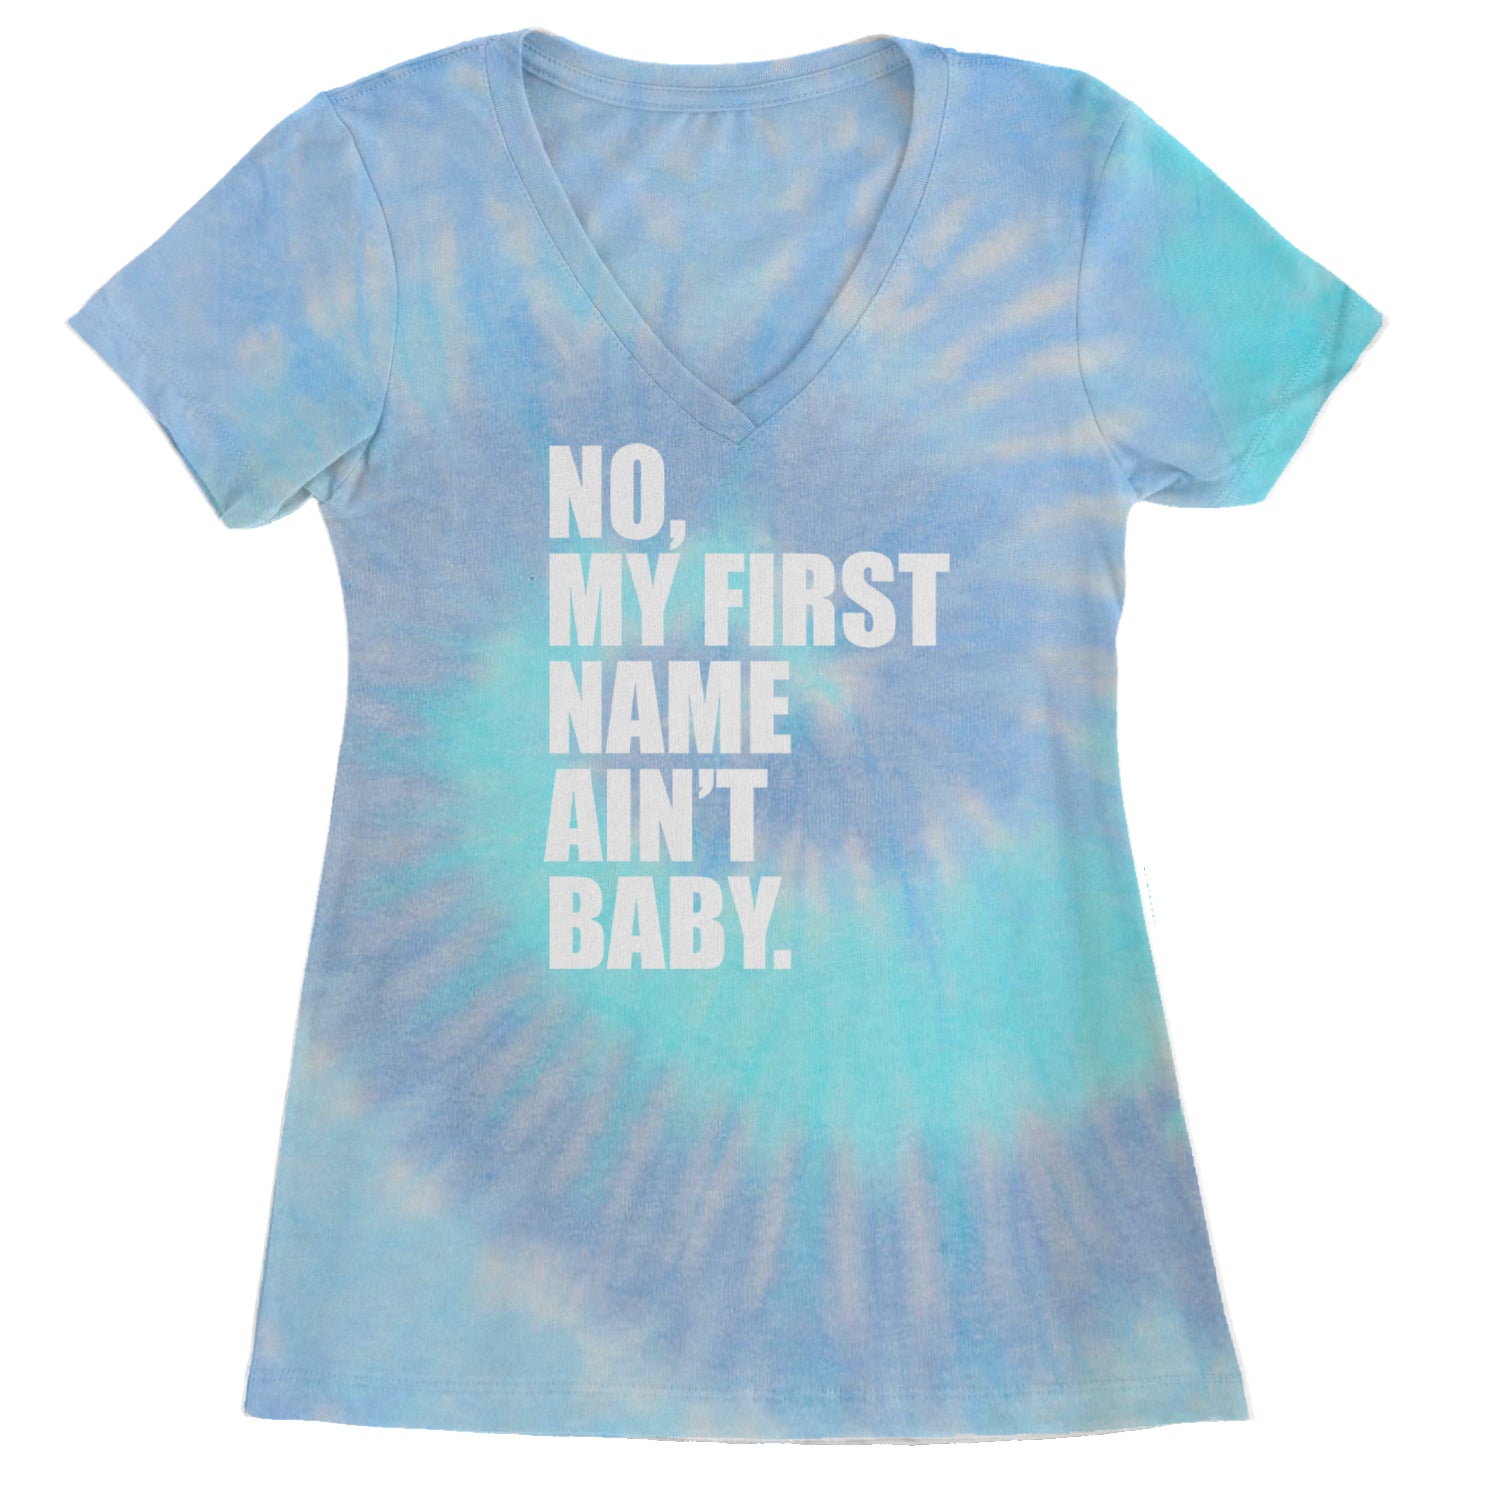 No My First Name Ain't Baby Together Again Ladies V-Neck T-shirt Blue Clouds